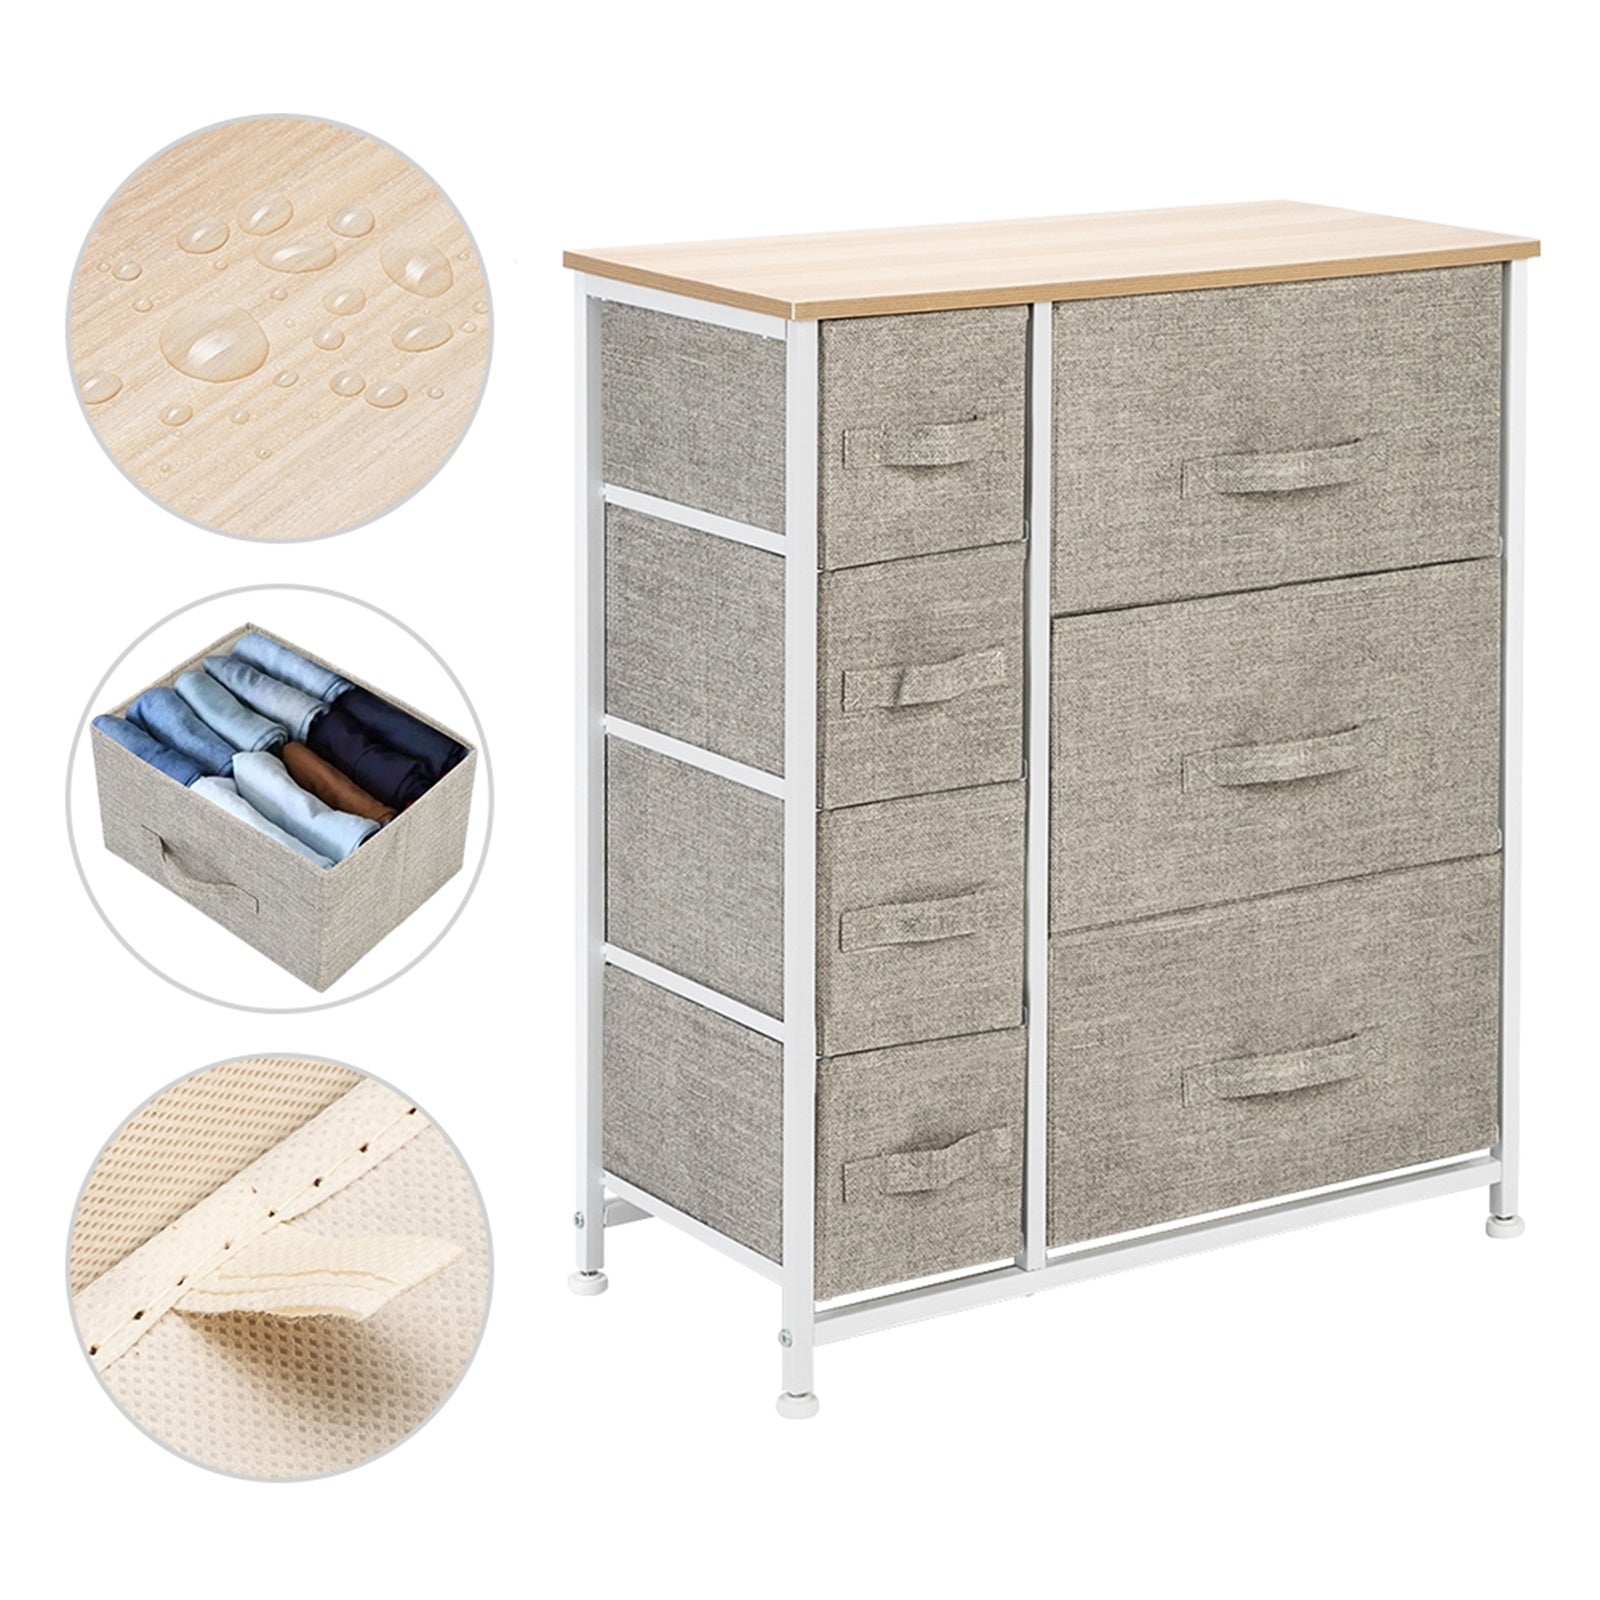 Dresser With 7 Drawers - Furniture Storage Tower Unit For Bedroom, Hallway, Closet, Office Organization - Steel Frame, Wood Top, Easy Pull Fabric Bins RT